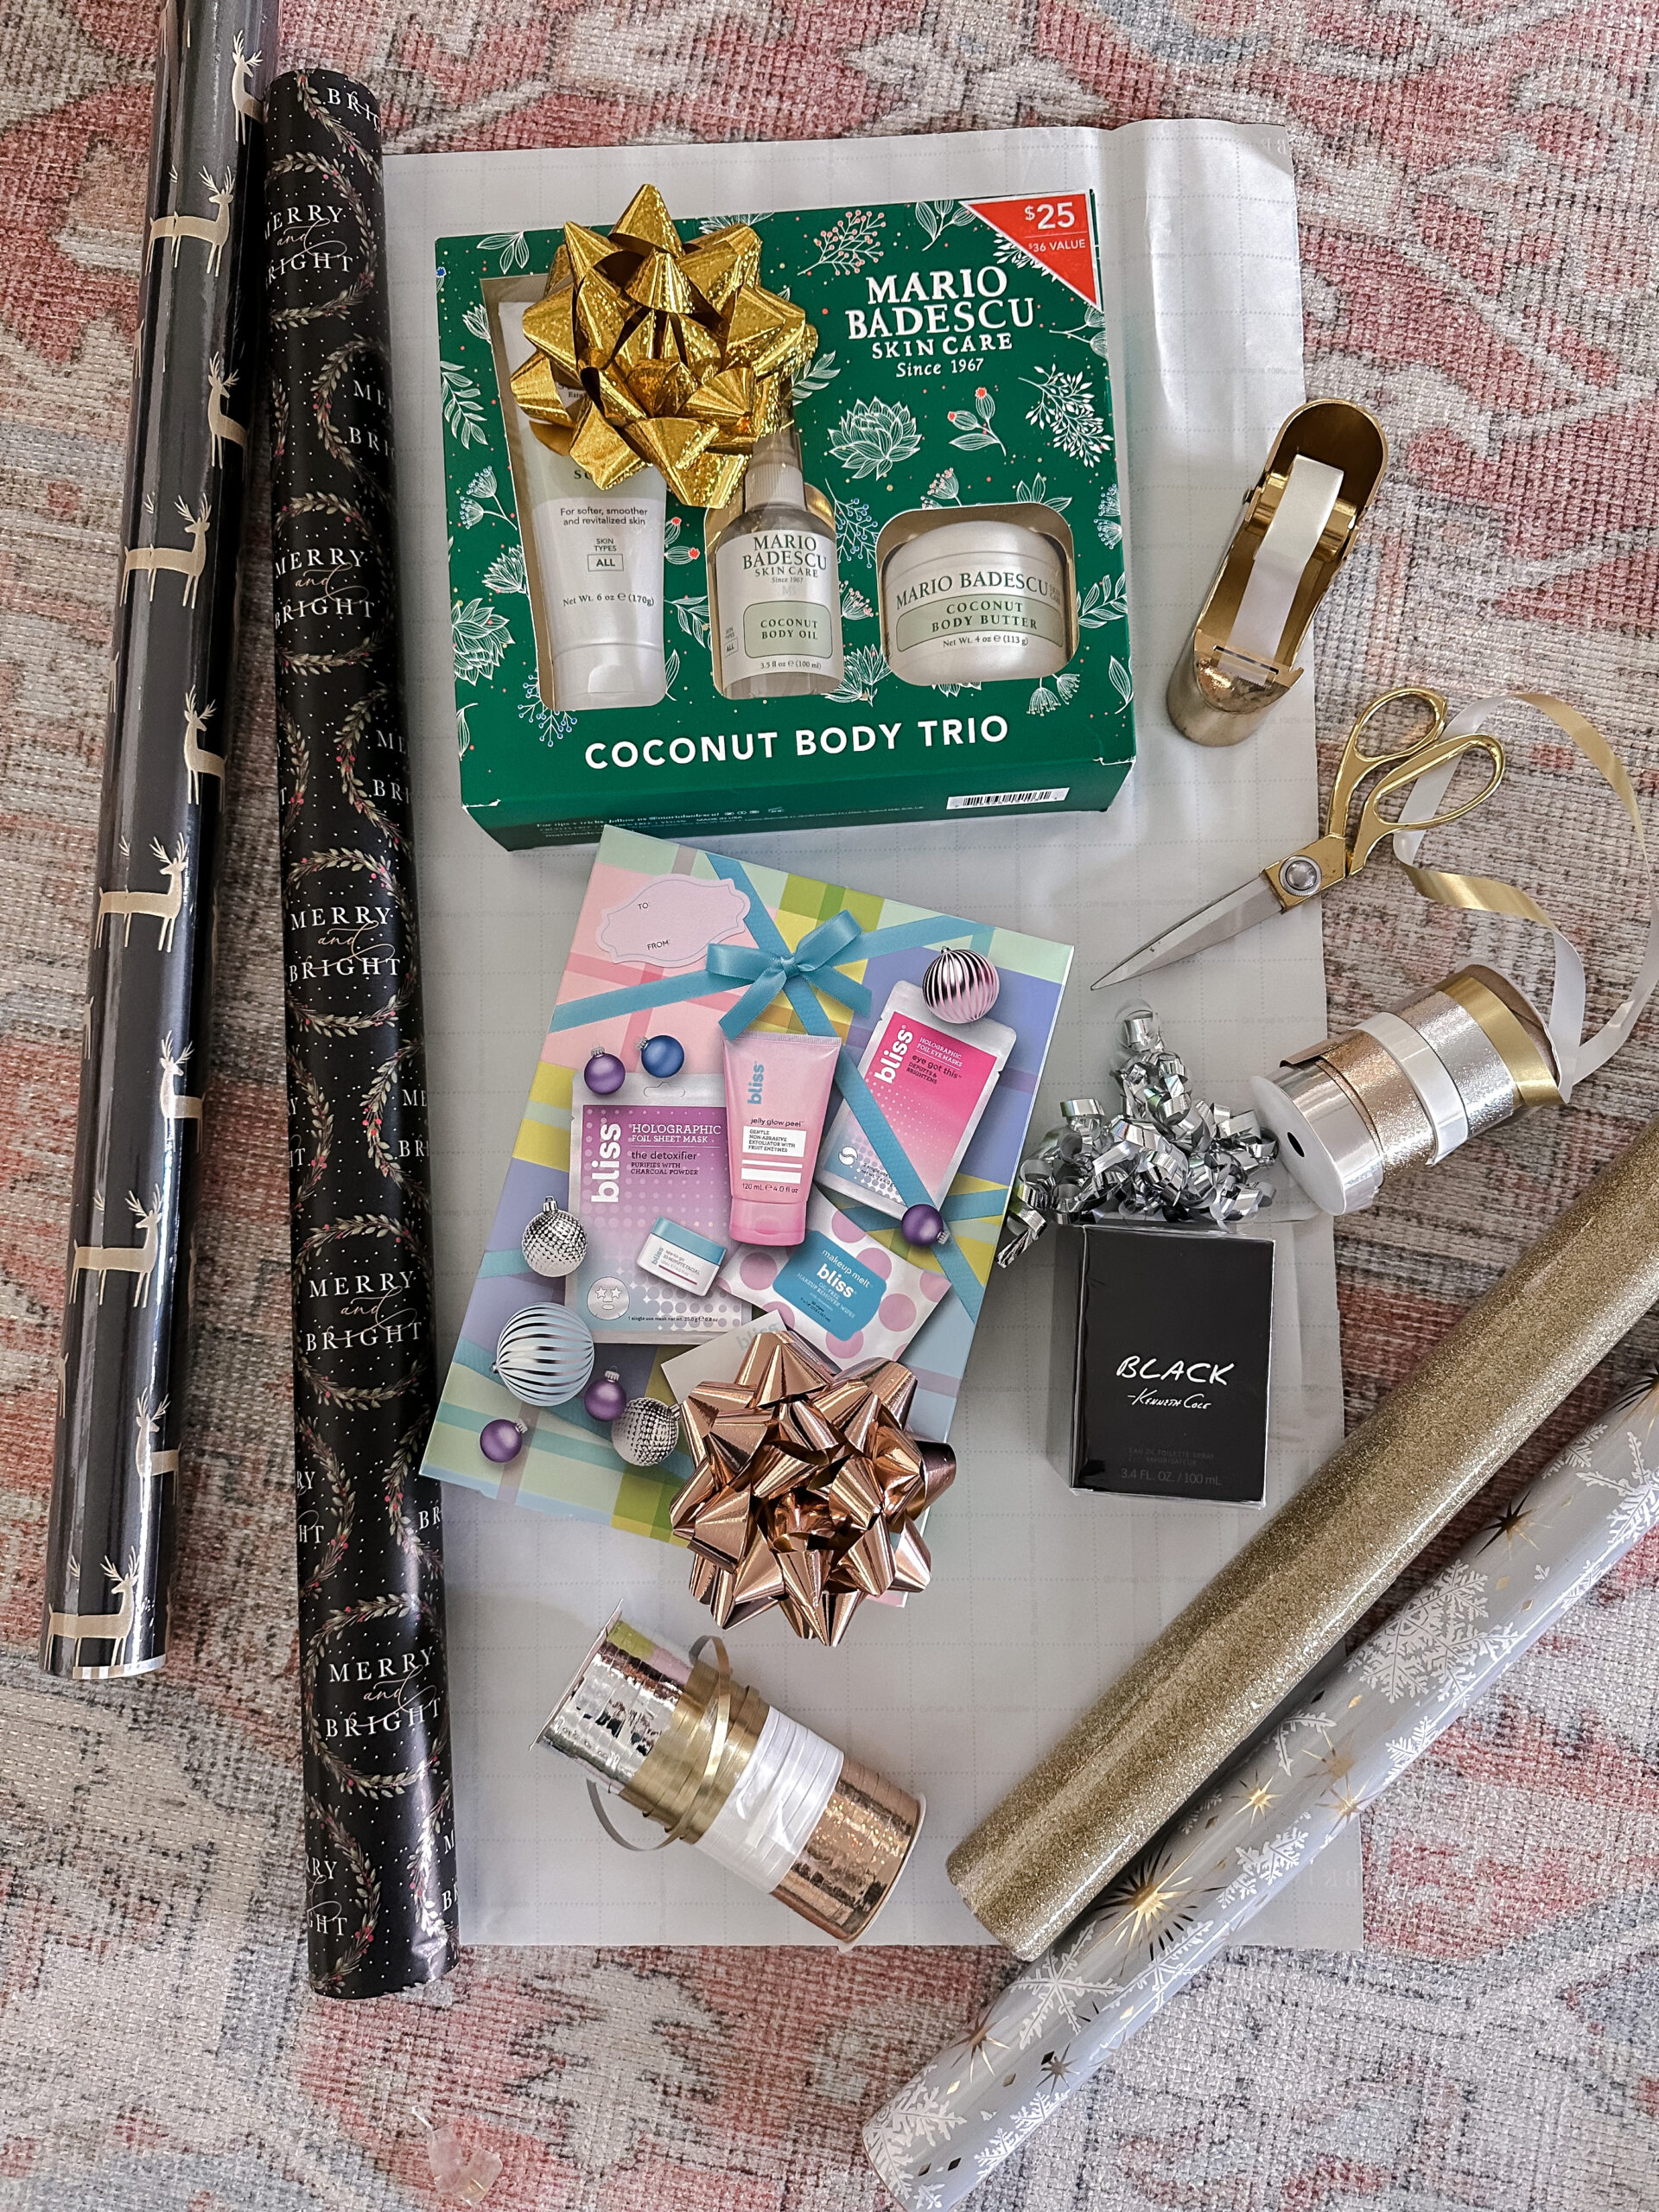 BEAUTY GIFTS FOR EVERYONE ON YOUR LIST!-Jaclyn De Leon Style. Walmart has great gift ideas at affordable prices. Affordable beauty gift sets on sale for a great price. There are lots of Black Friday deals going on all week so now is a great time to shop.